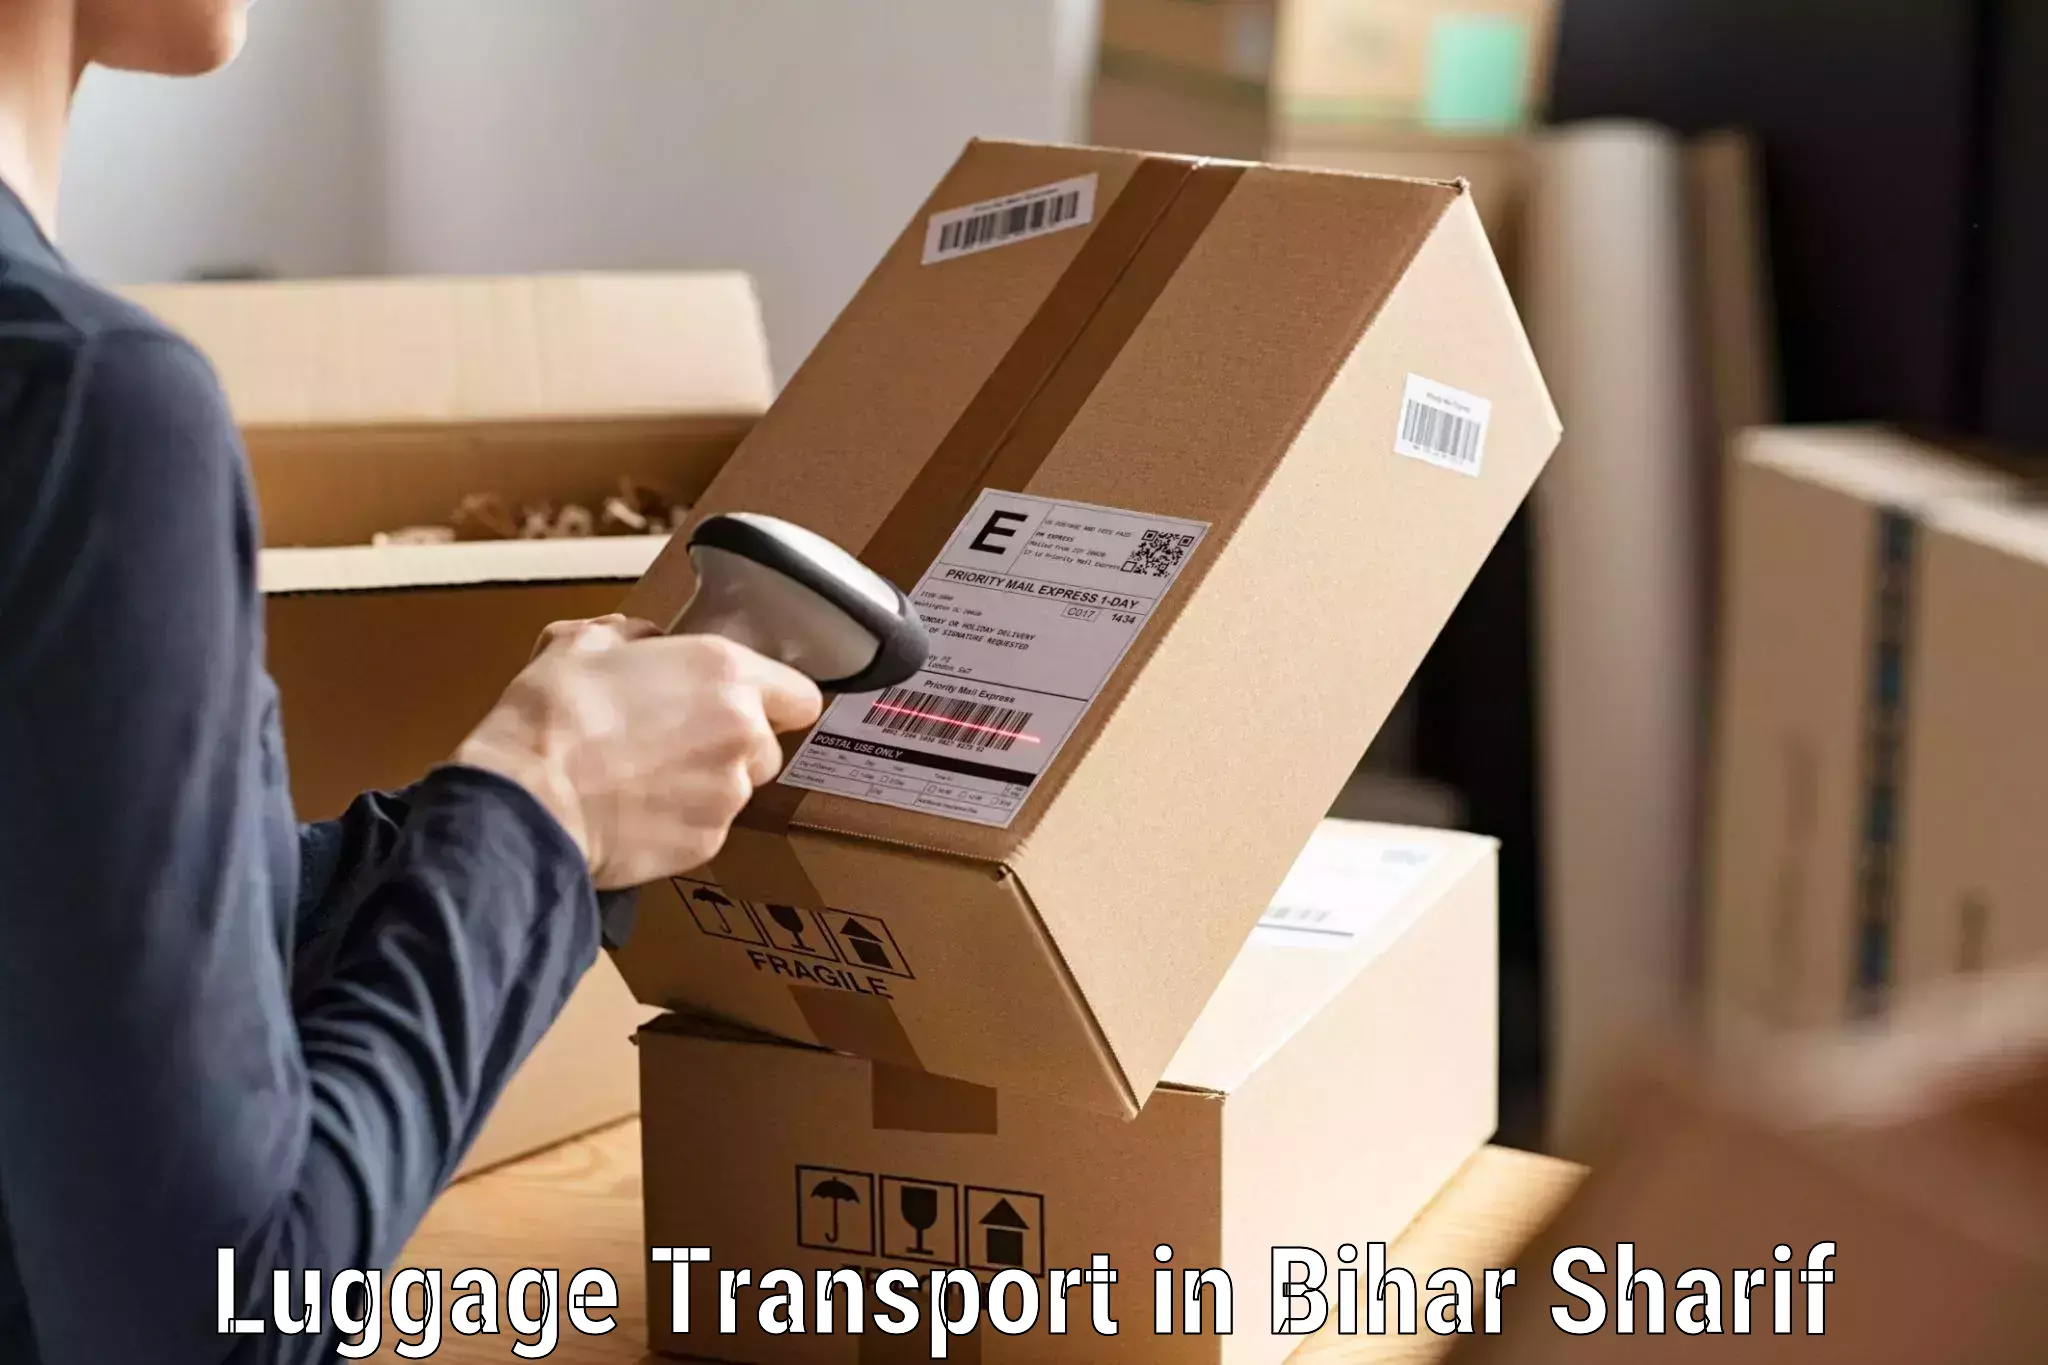 Luggage delivery news in Bihar Sharif